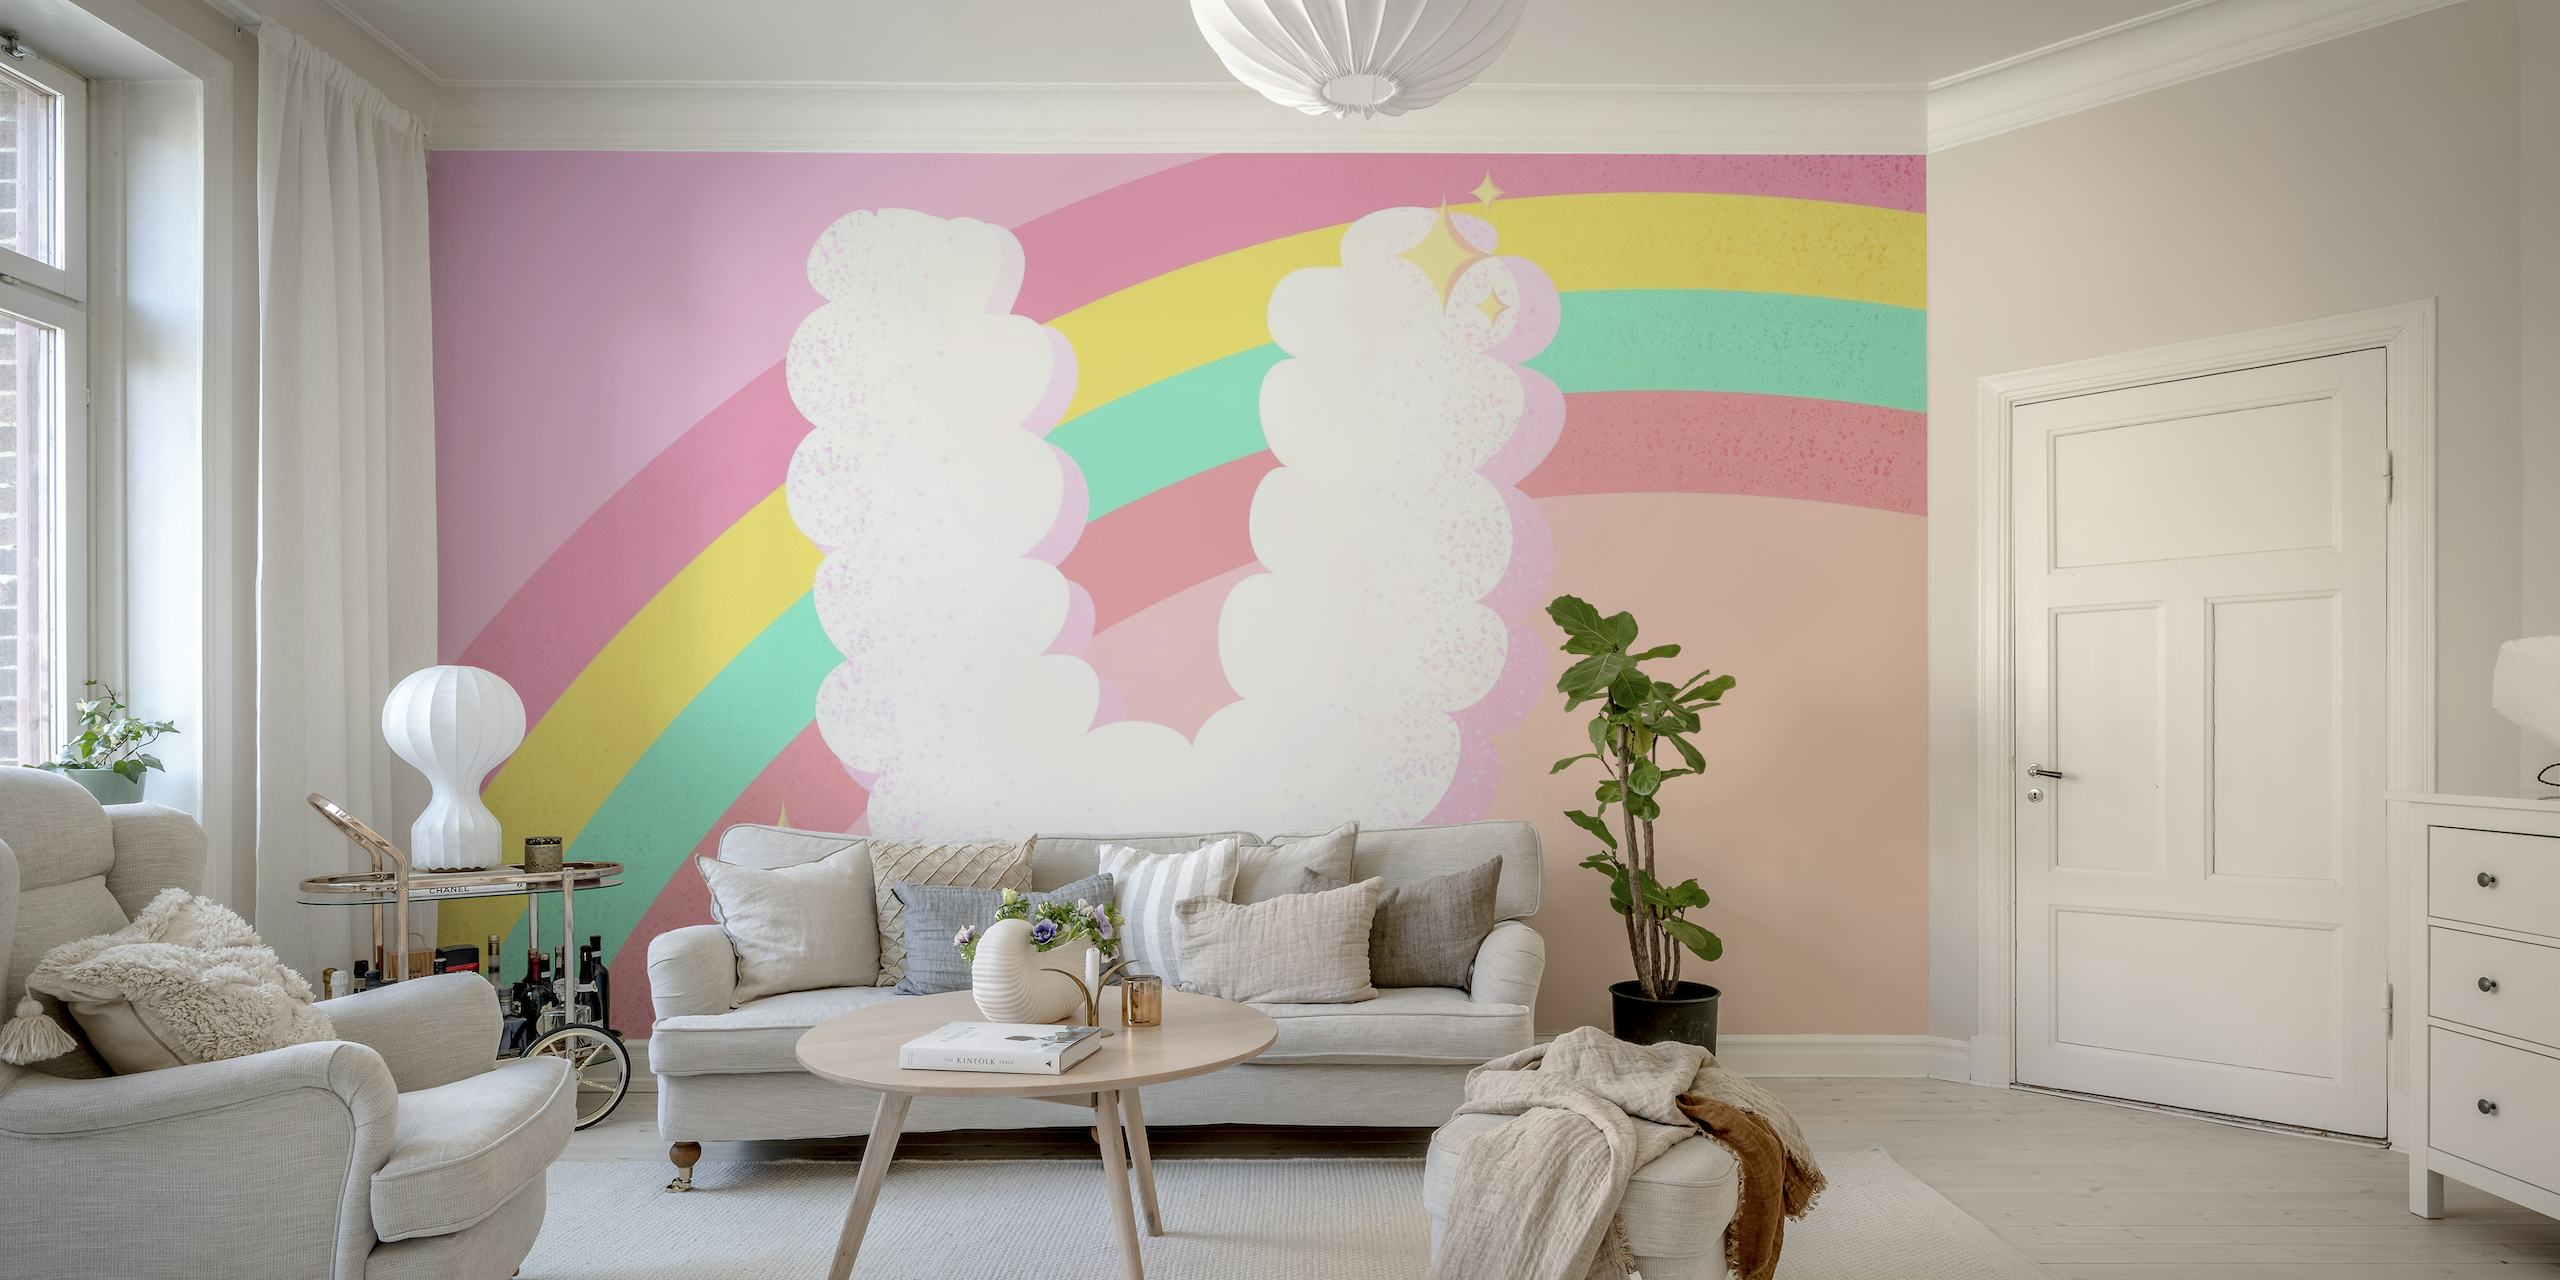 Whimsical unicorn and rainbow wall mural on a pastel background